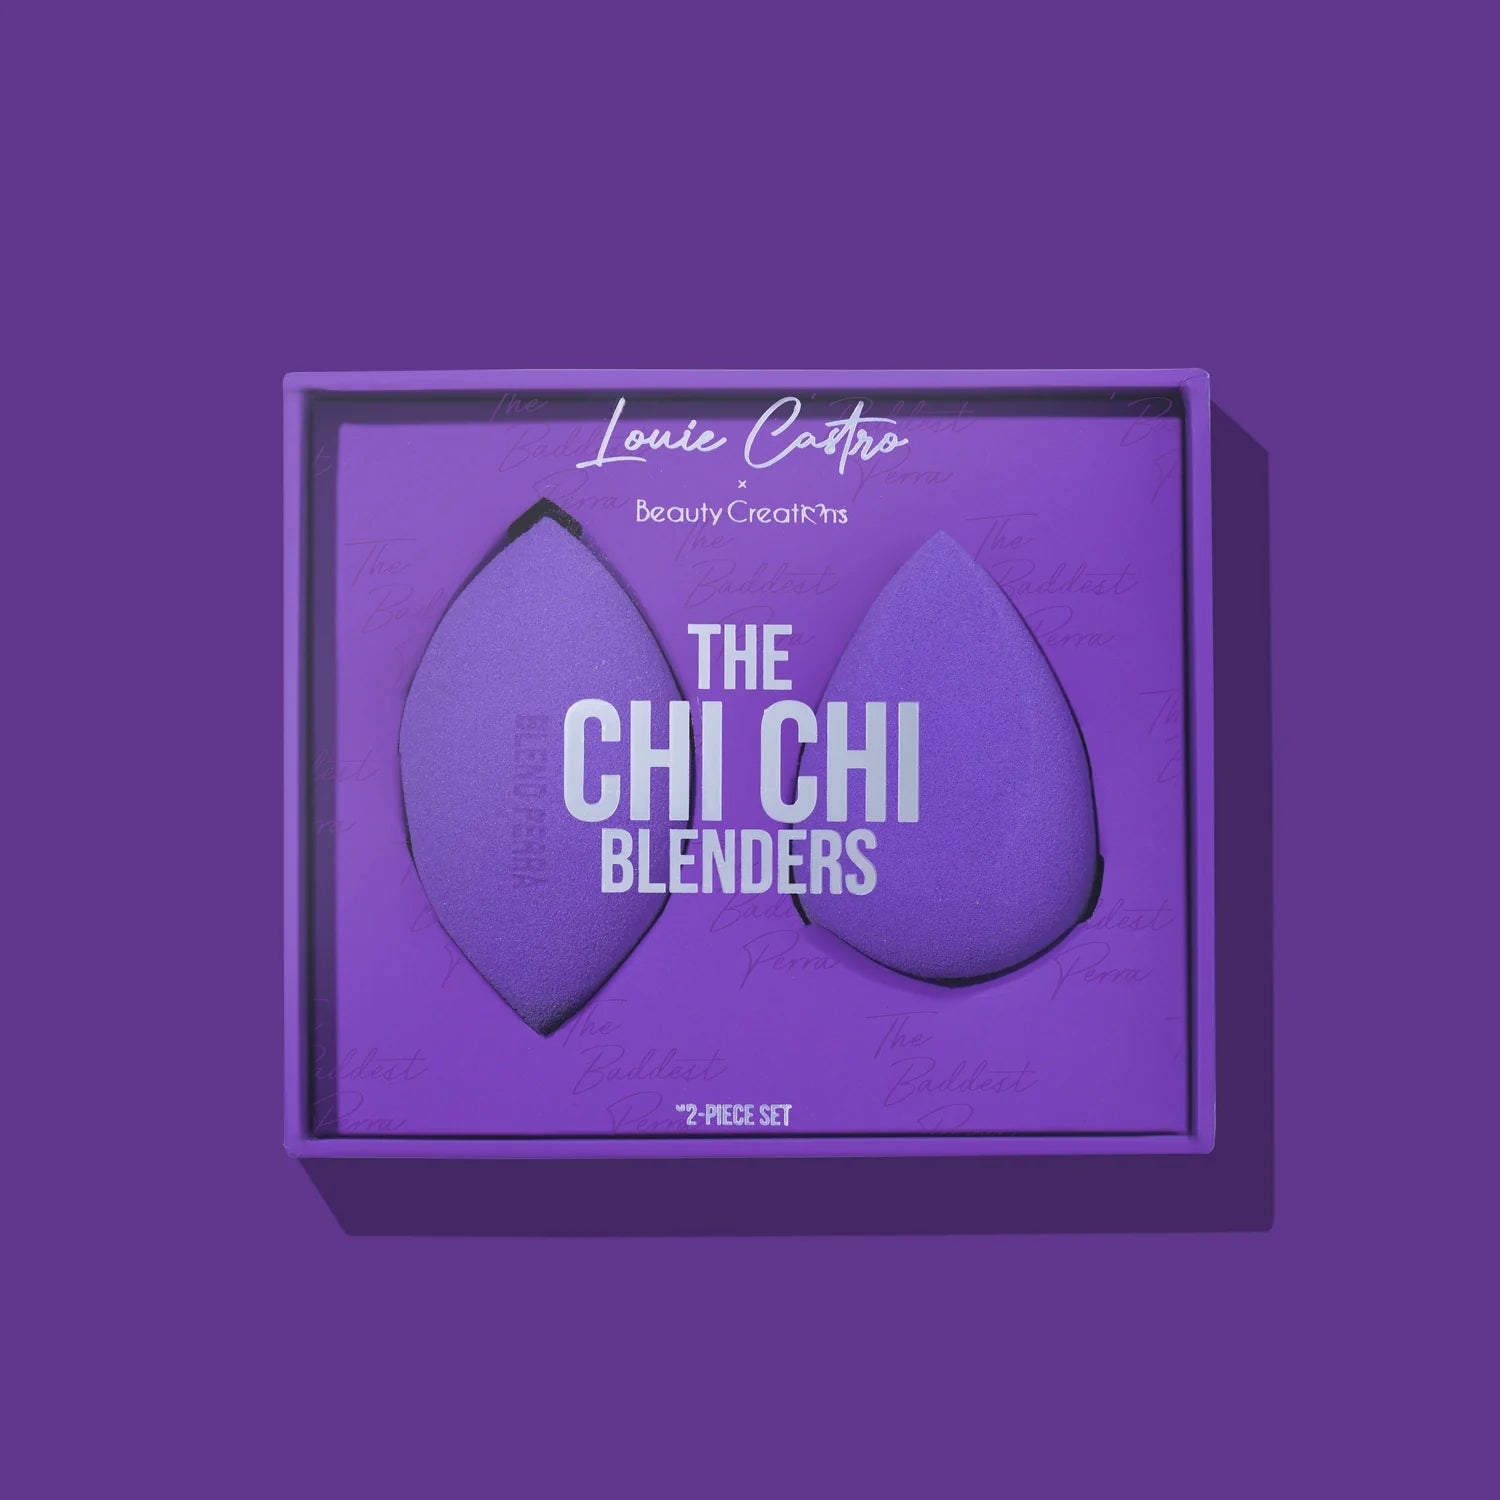 BEAUTY CREATIONS LOUIE CASTRO | THE CHI CHI BLENDERS DUO